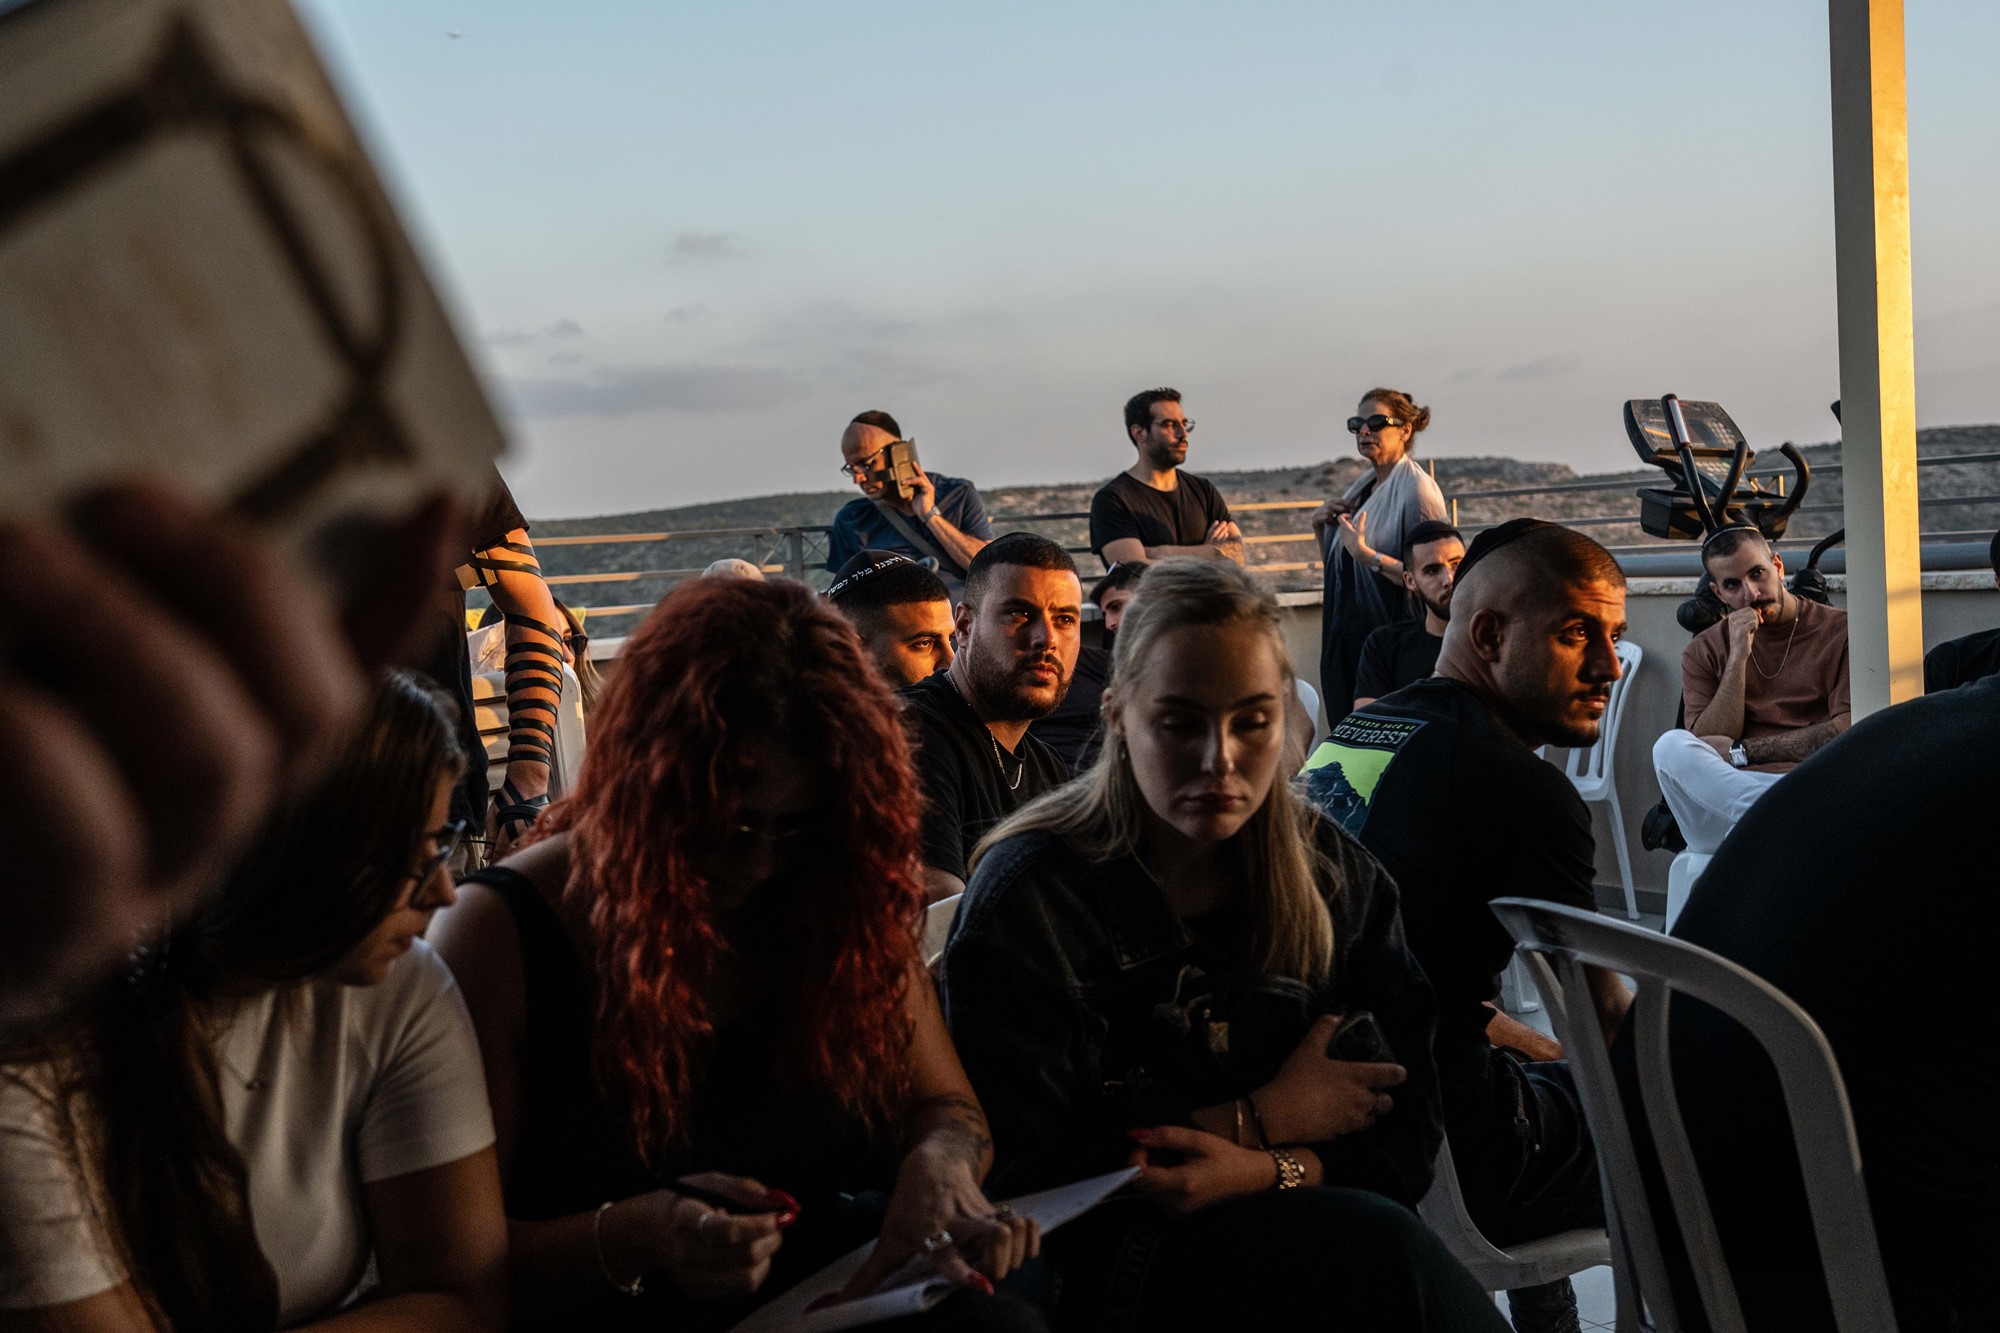 A group of people sit on chairs, mourning, as the sun sets behind them